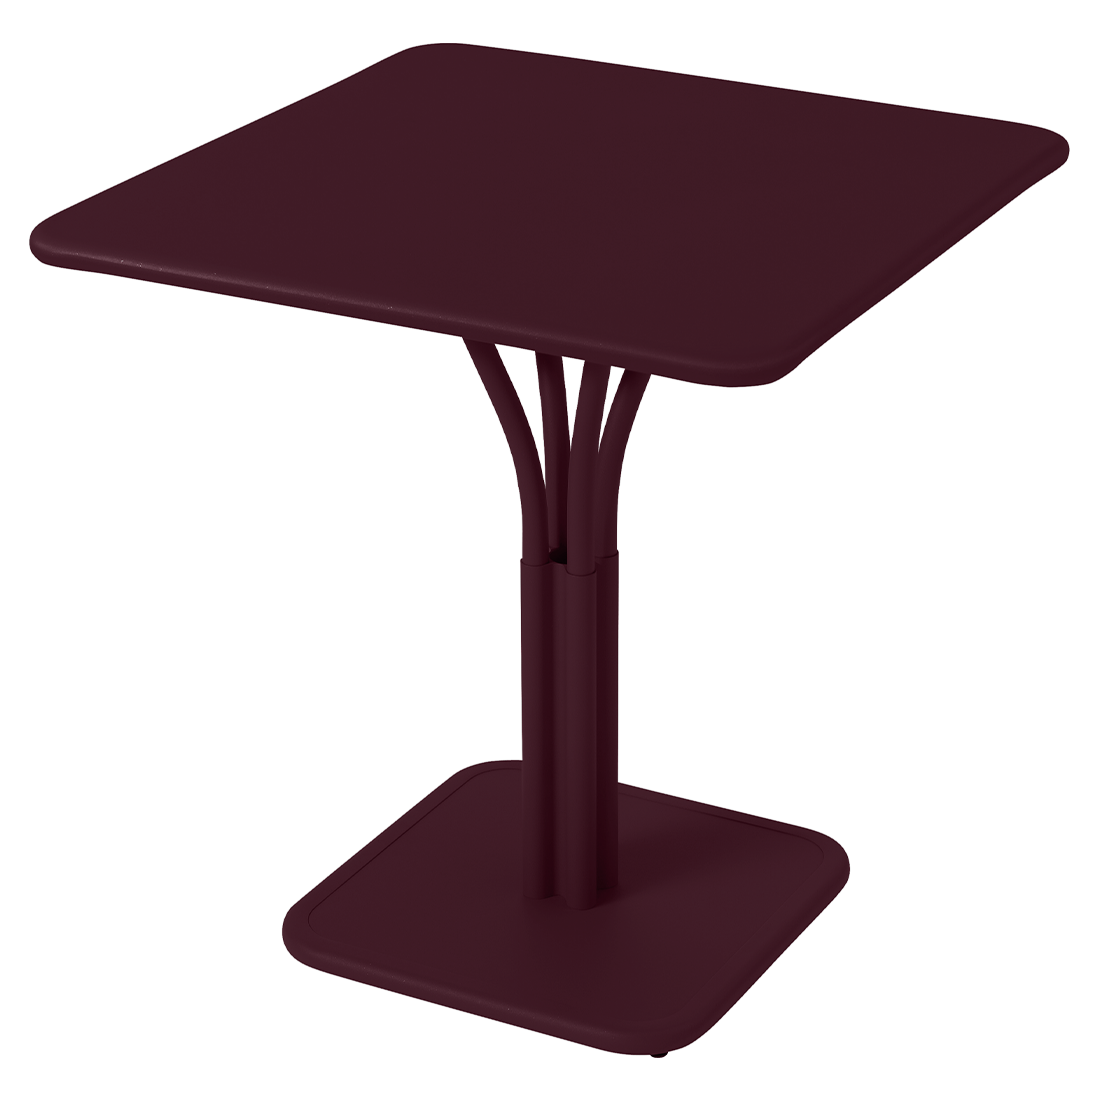 Luxembourg Pedestal Table 71 x 71